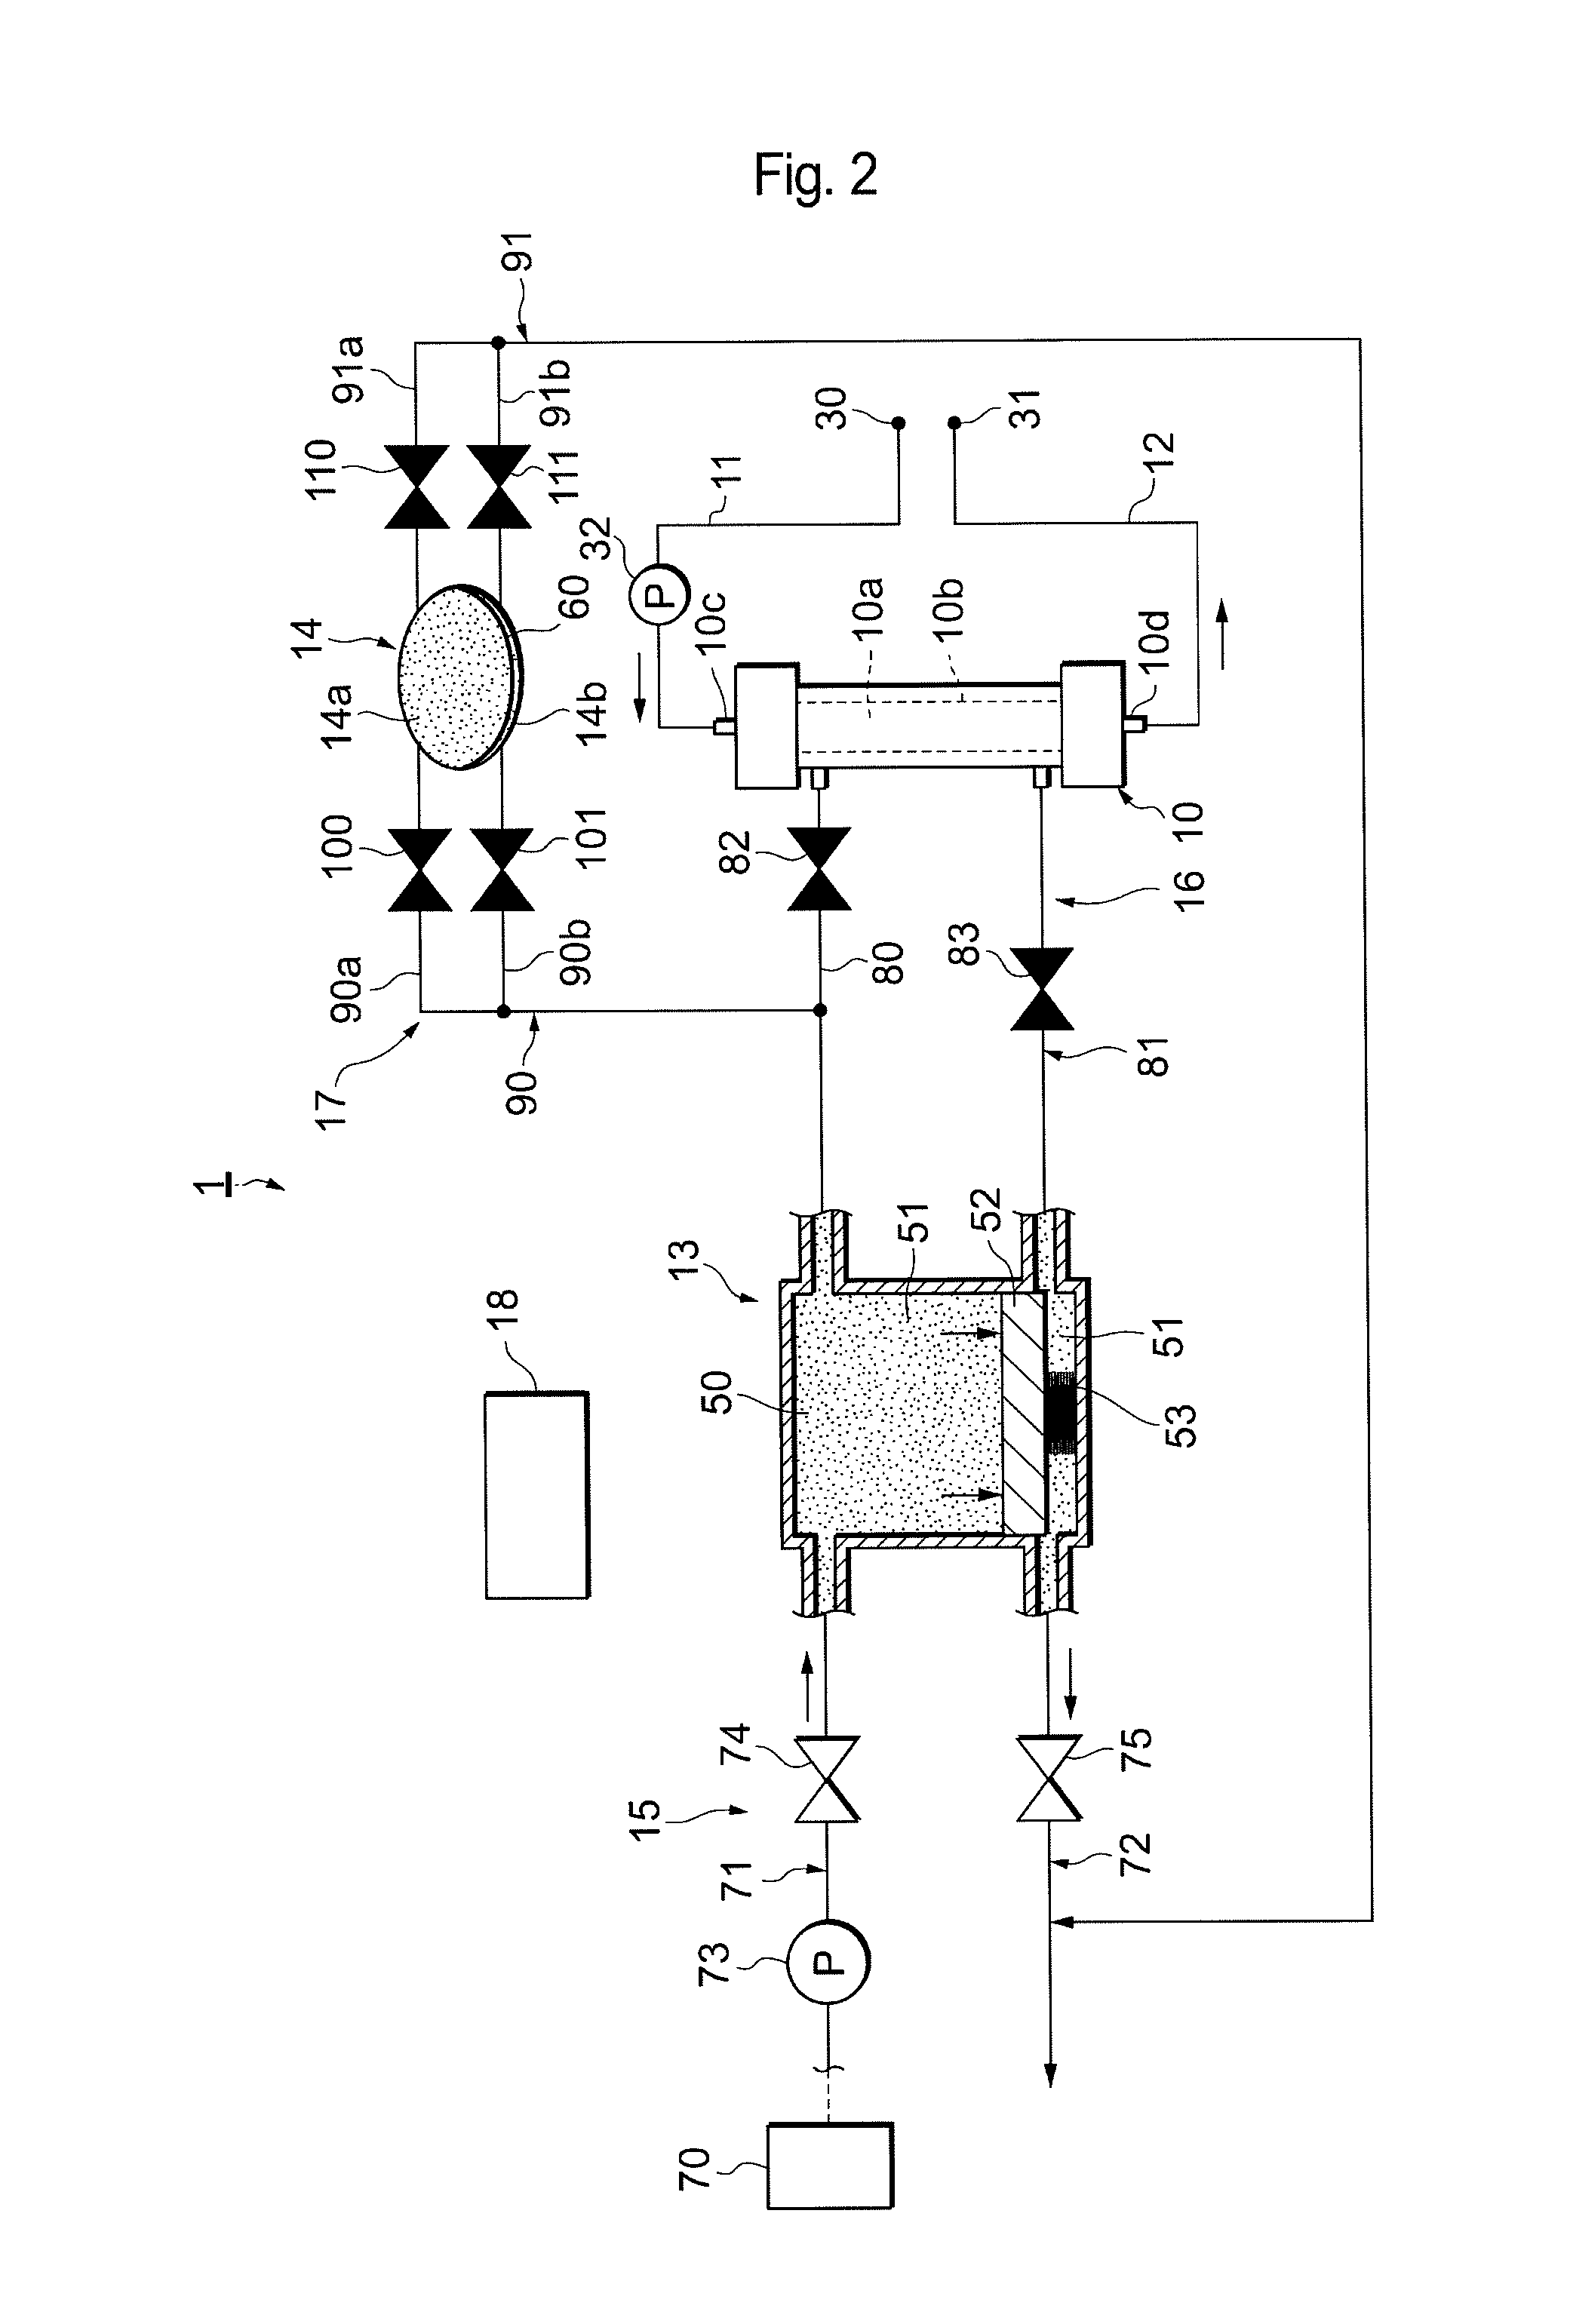 Hemodialysis apparatus, method of operating hemodialysis apparatus, and water content removal system